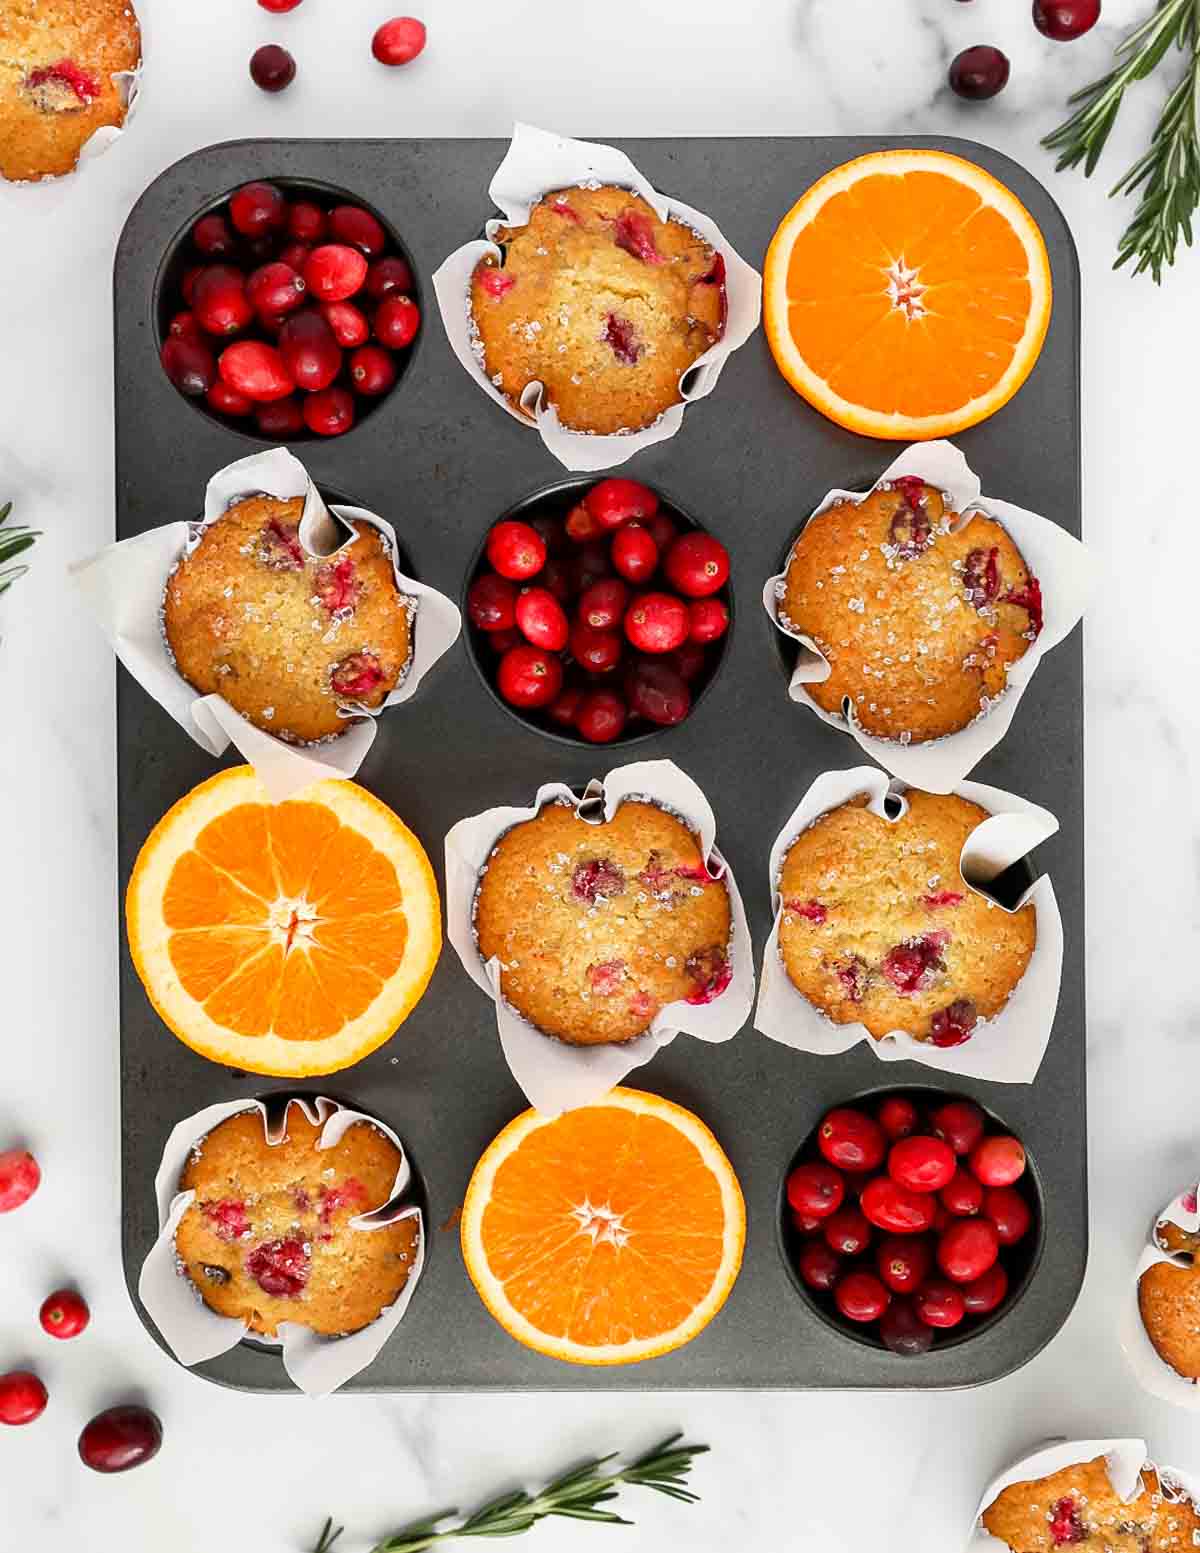 A muffin tin filled with baked muffins, cranberries, and sliced oranges.